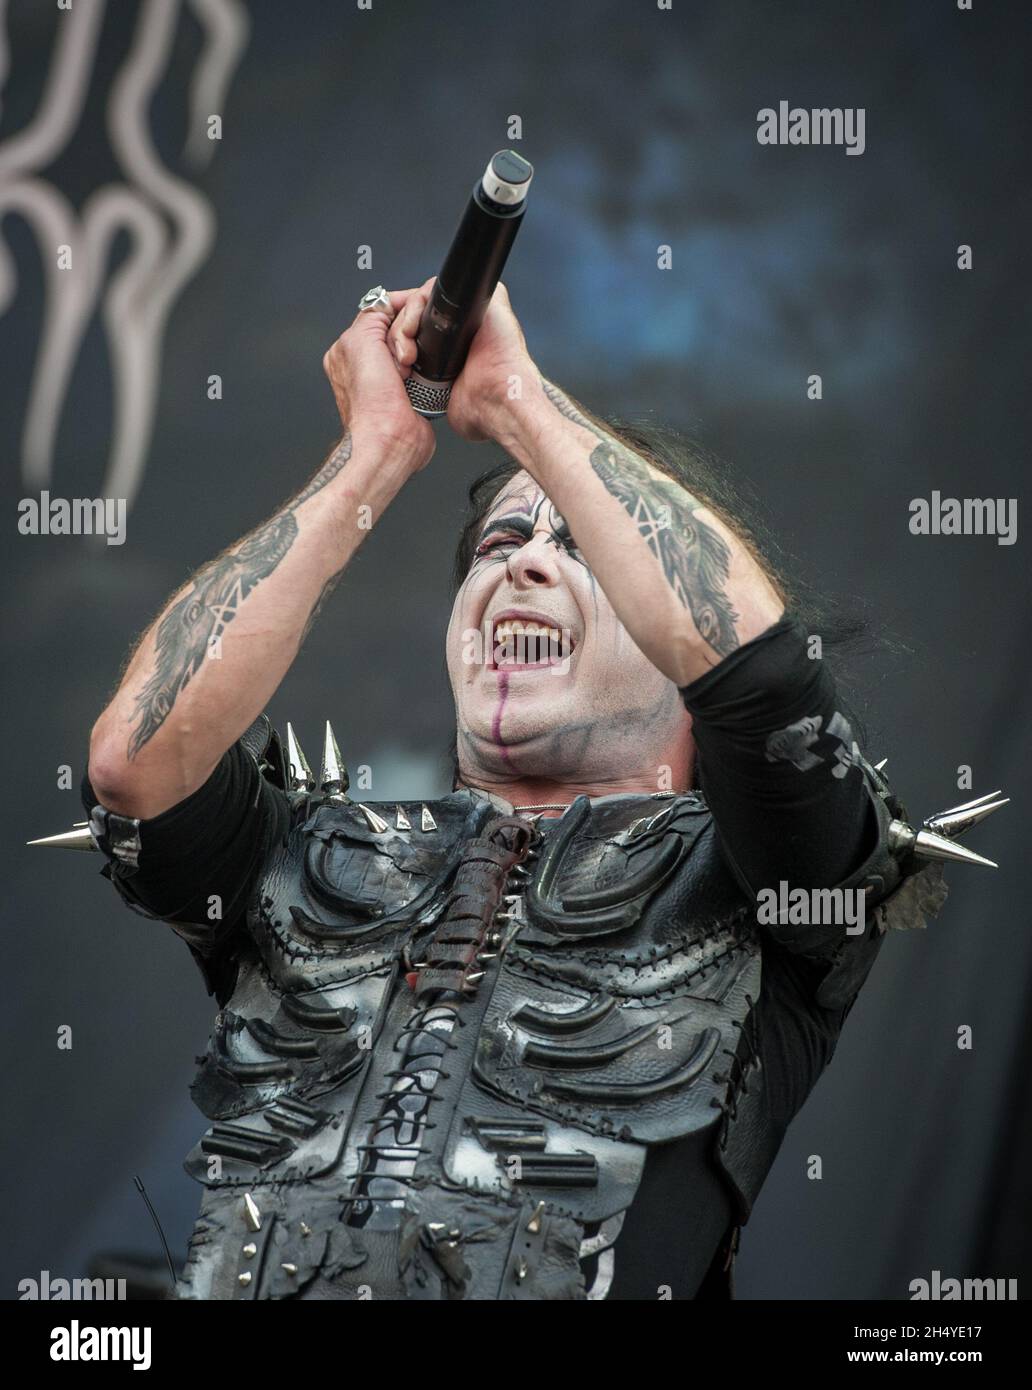 Dani Filth of the British band Cradle of Filth performs live on stage on day 3 of Download Festival at Donington Park on June 10, 2018 in Castle Donington, England. Picture date: Sunday 10 June, 2018. Photo credit: Katja Ogrin/ EMPICS Entertainment. Stock Photo